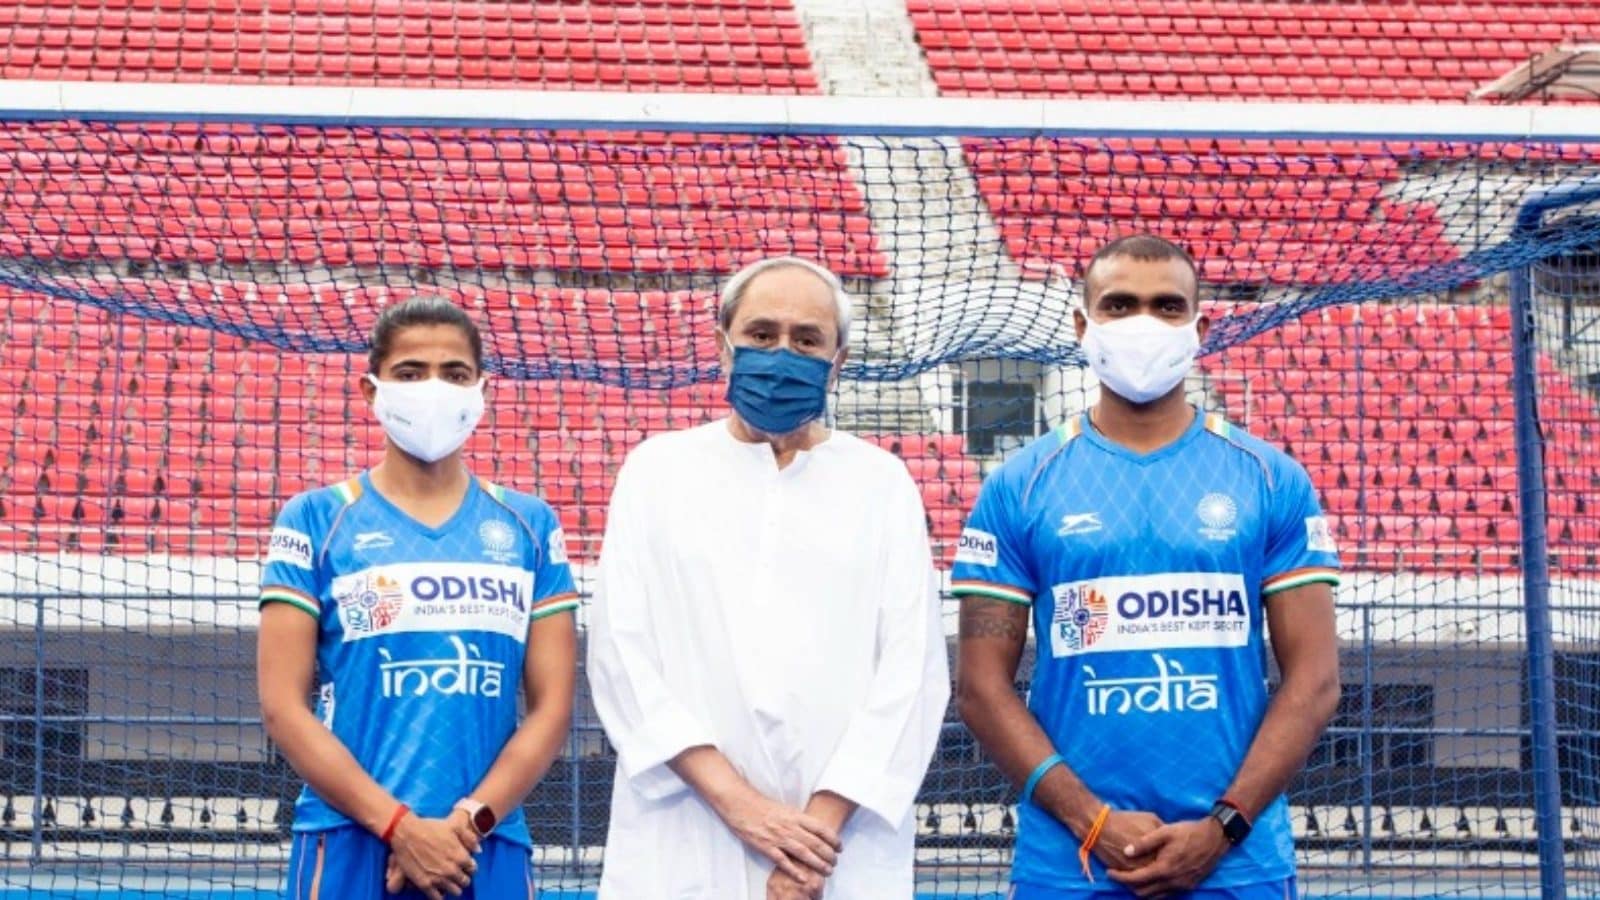 India’s Largest Hockey Stadium in Odisha to Be Completed by July 2022